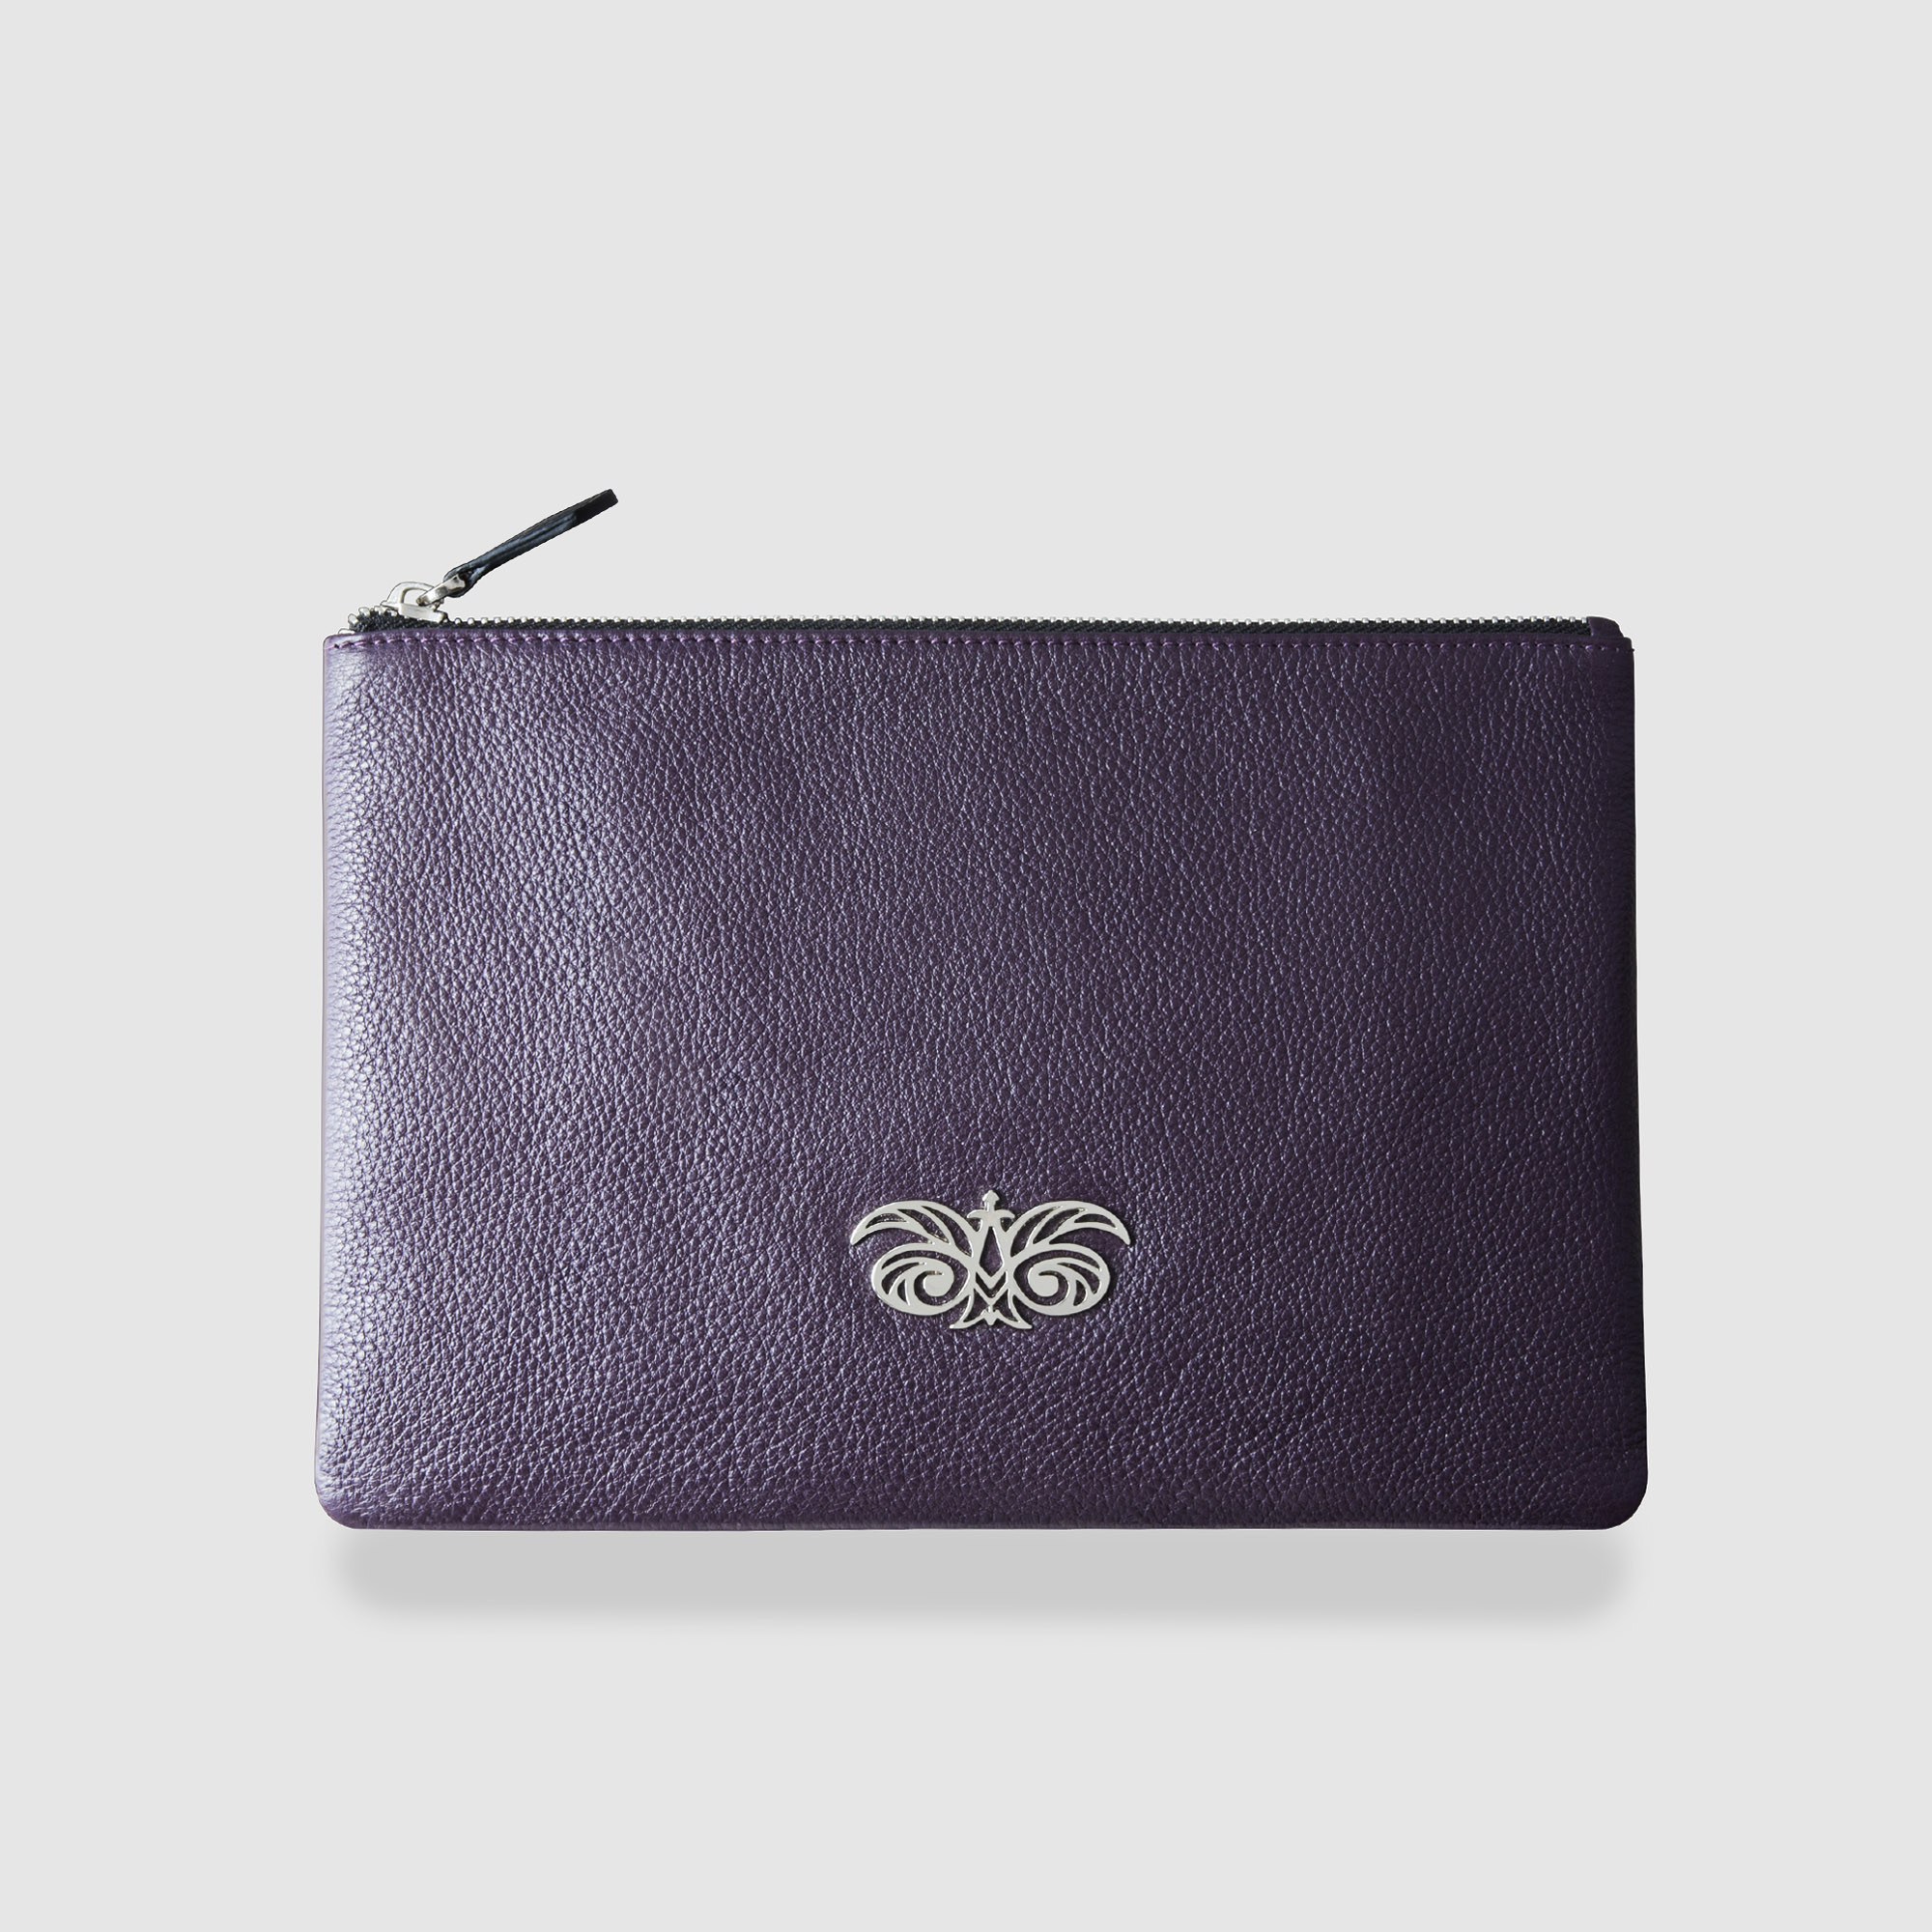 Zipper pouch OSLO in grained calfskin, purple color and light beige satin lining - front view